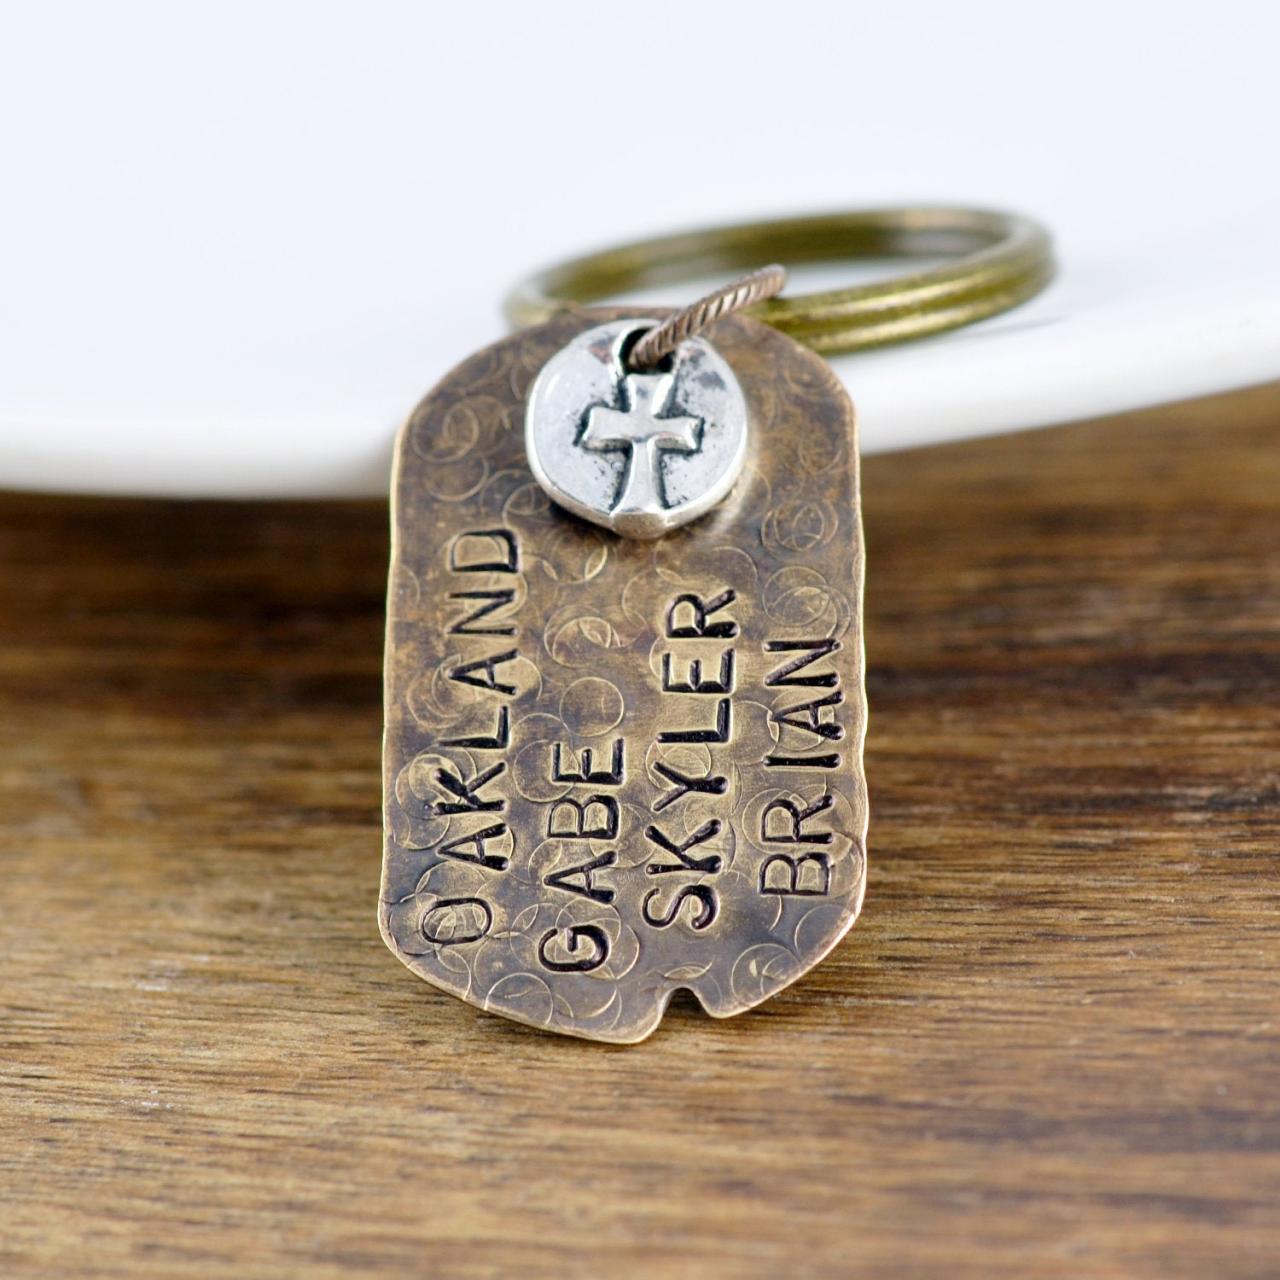 Personalized Keychain For Men, Personalized Keychain, Hand Stamped Mens Keychain, Mens Gifts, Gift For Husband, Religious Keychain